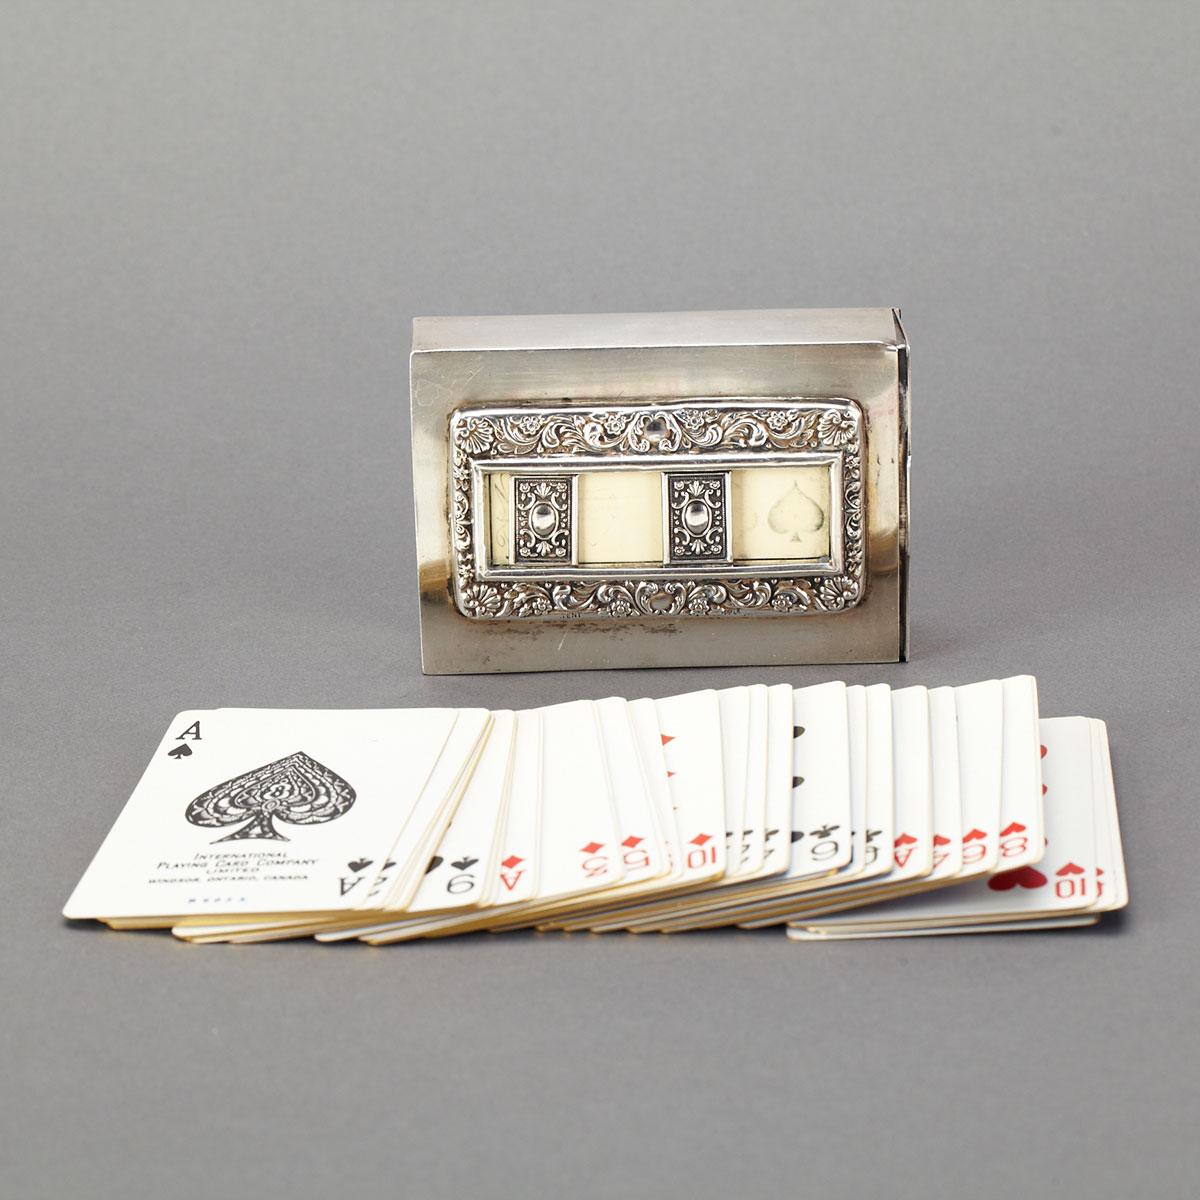 Edwardian Silver Playing Card Case, Payton, Pepper & Sons, Chester, 1906